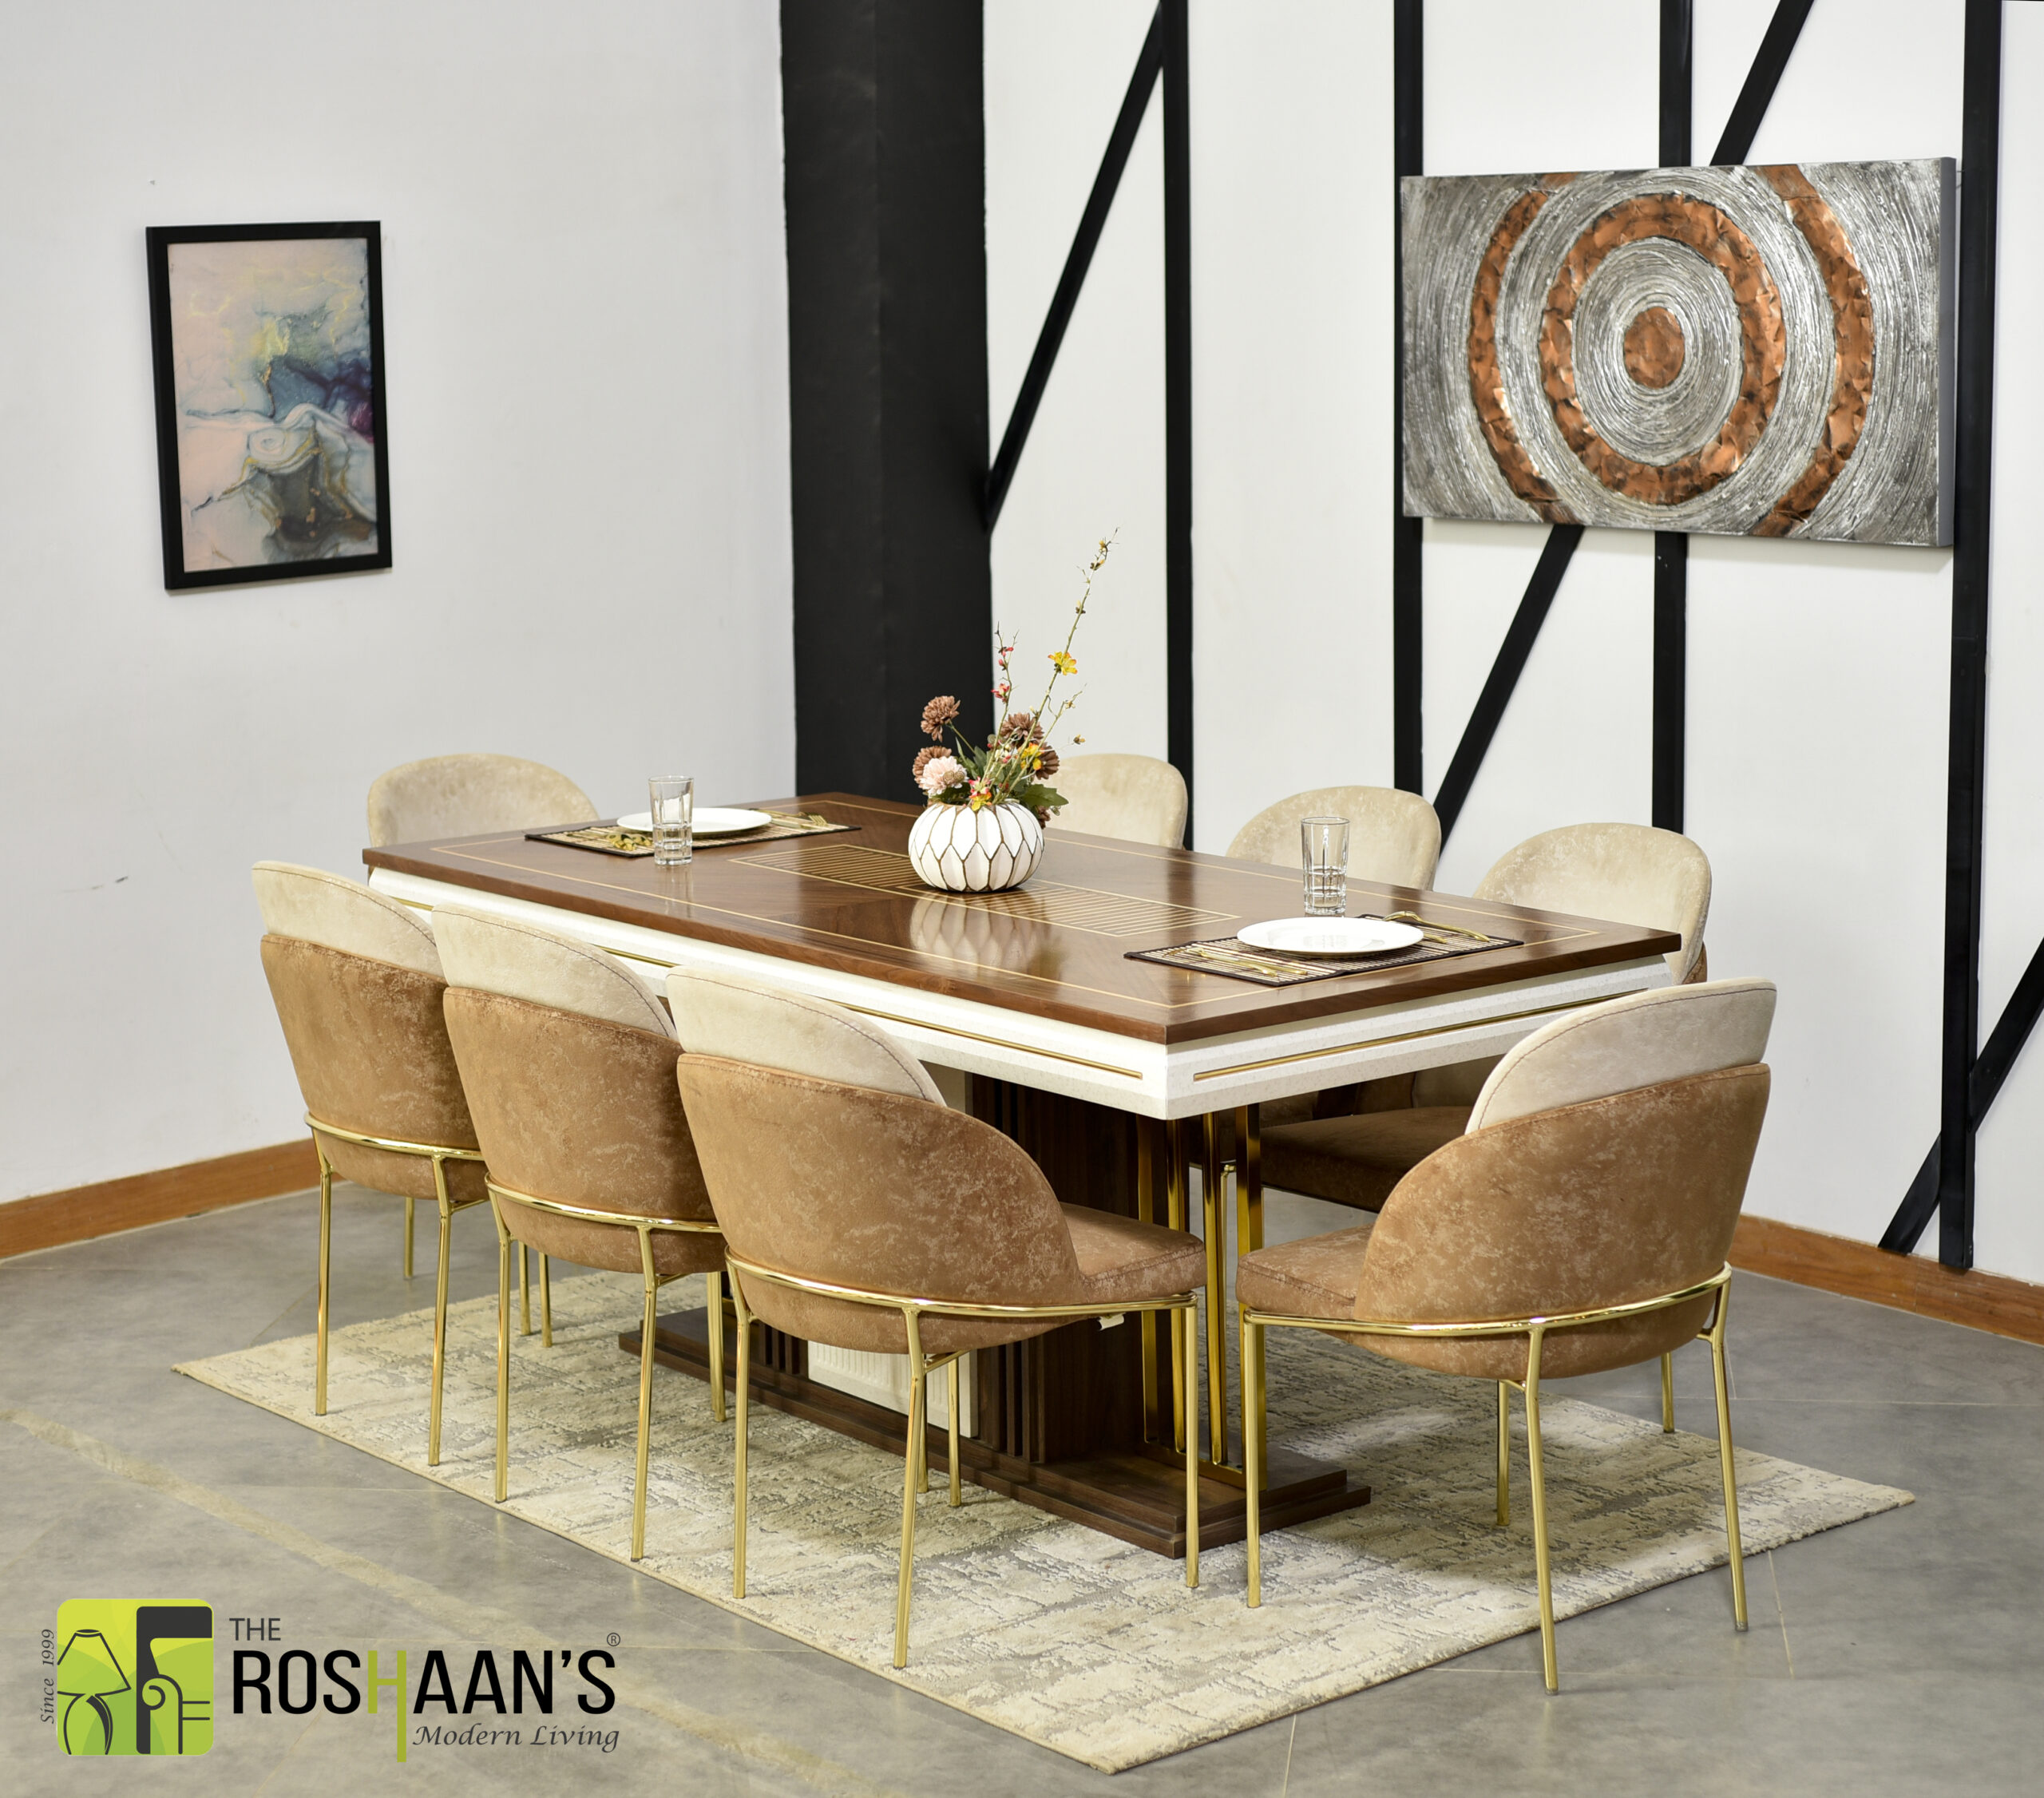 Roshaans Dining Table